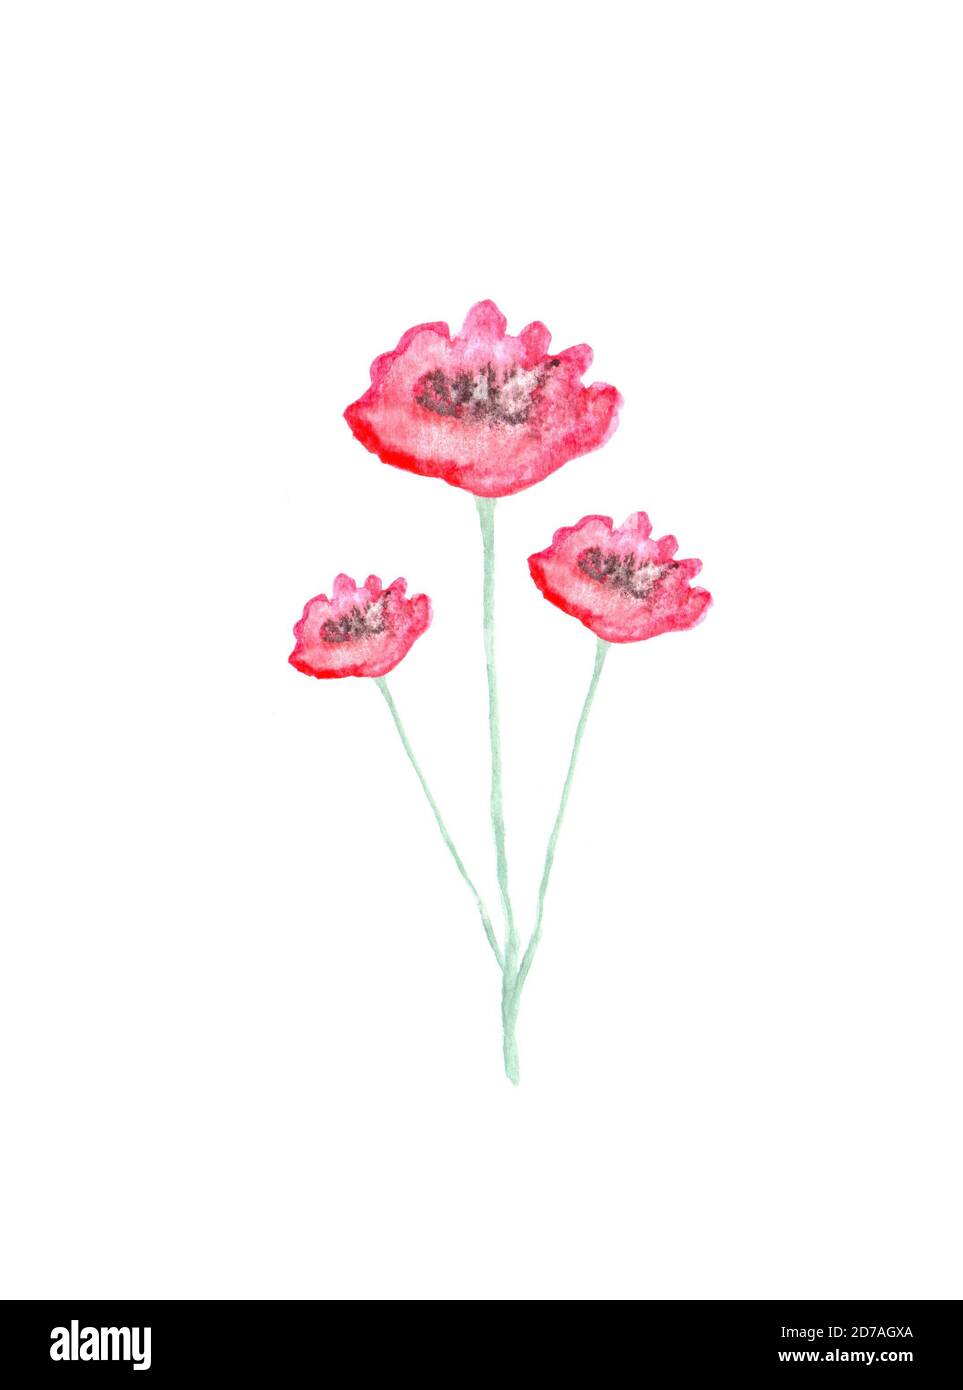 Watercolor hand painted illustration of poppy flowers Stock Photo